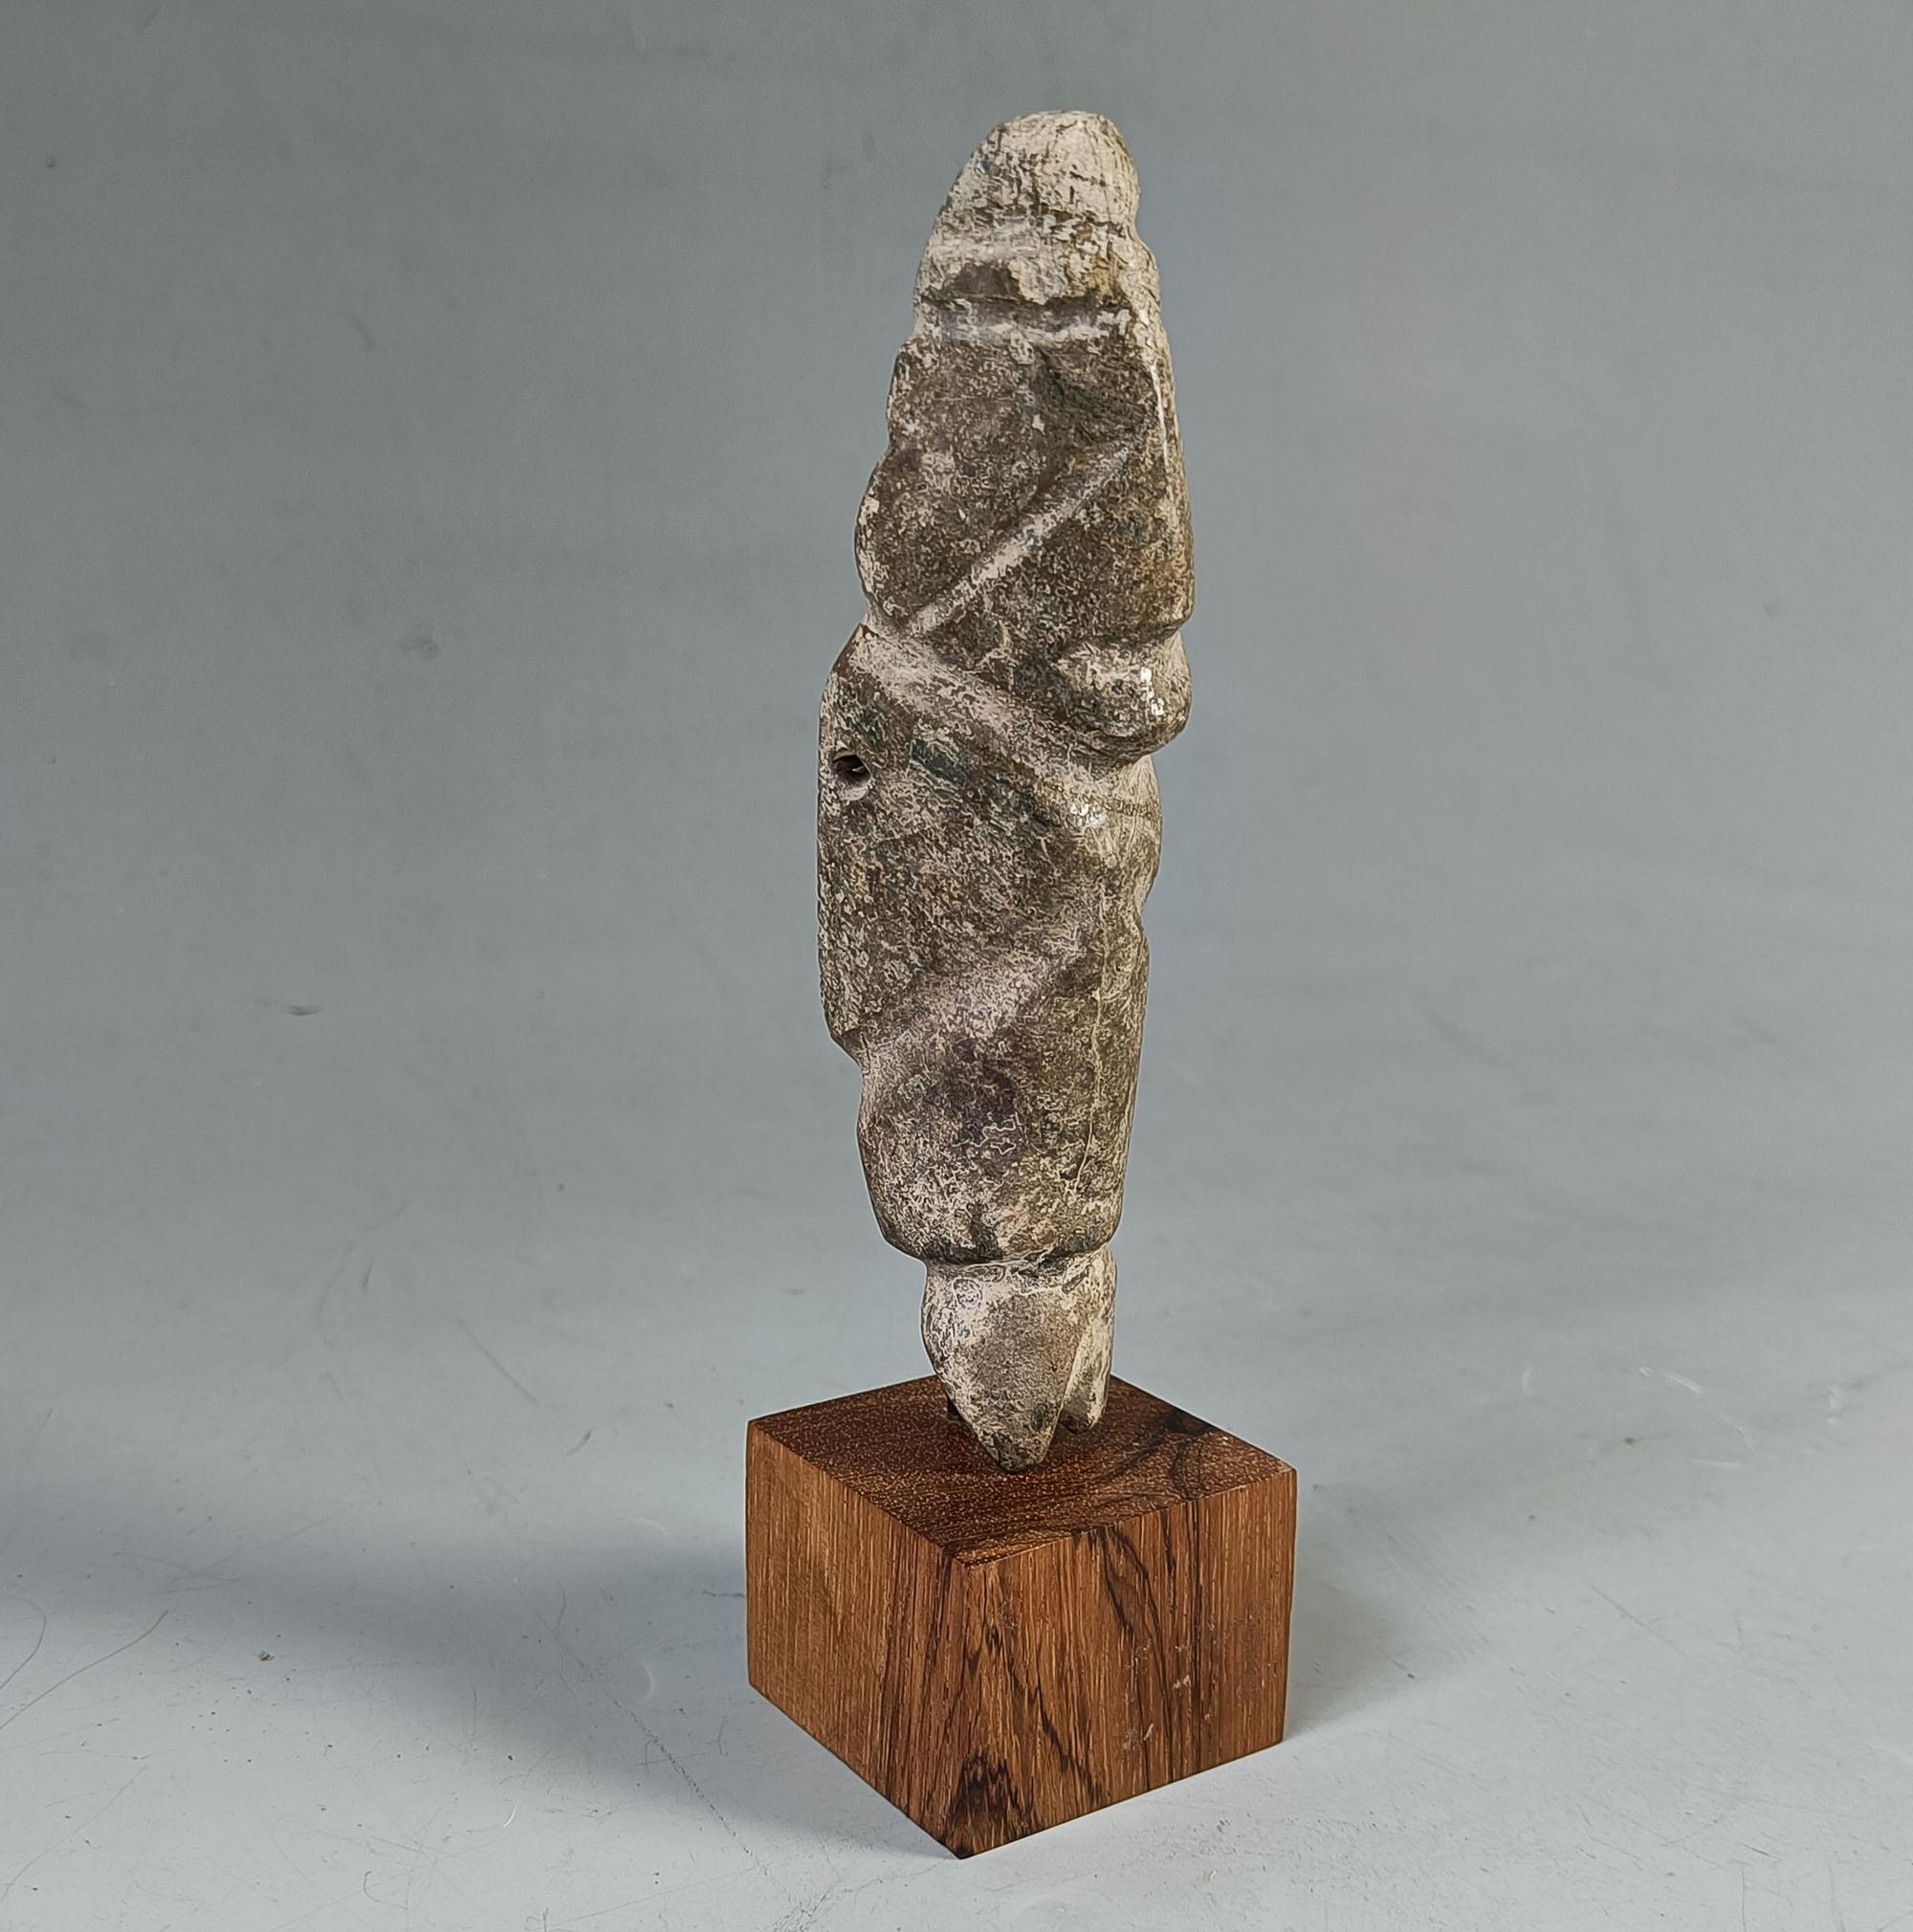  Pre Columbian Mezcala Stone Pendant Axe god Figure Ancient Mexico

Pre-Columbian, Southern Mexico, Guerrero region, Mezcala culture, ca. 600 to 100 BCE

A  abstract serpentine figural pendant form known as an axe god with string-cut grooves and